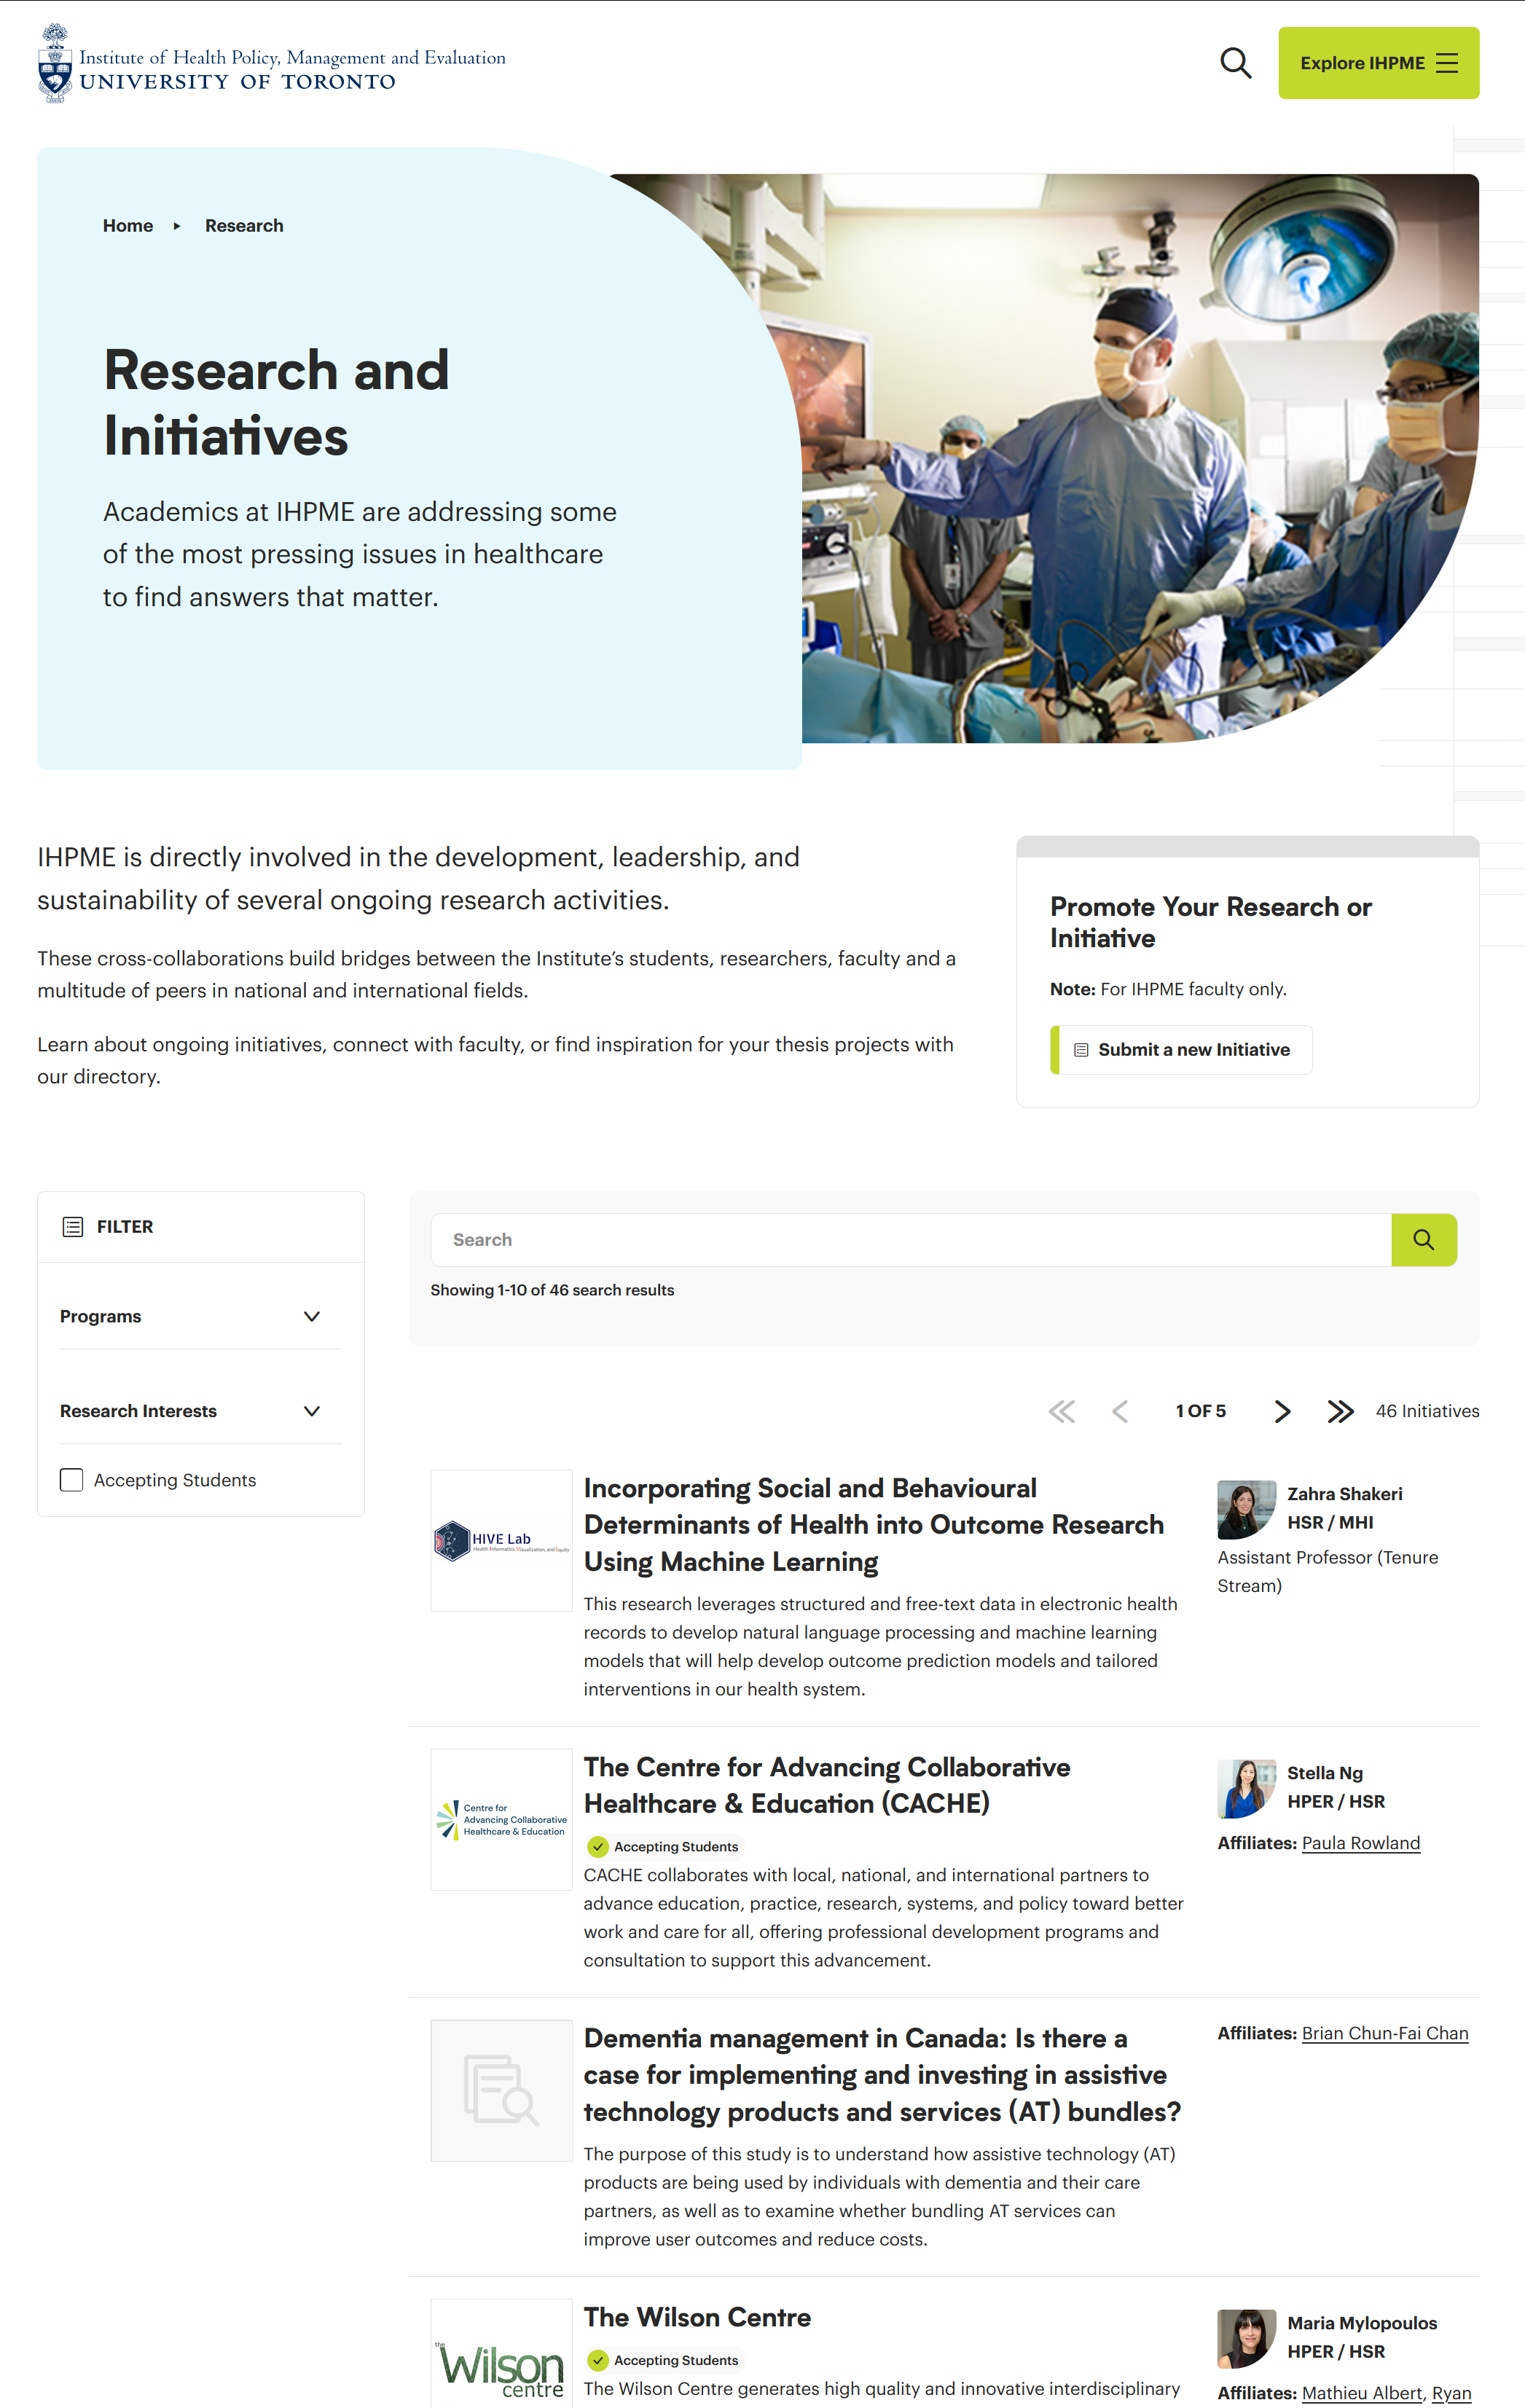 Research and initiatives page